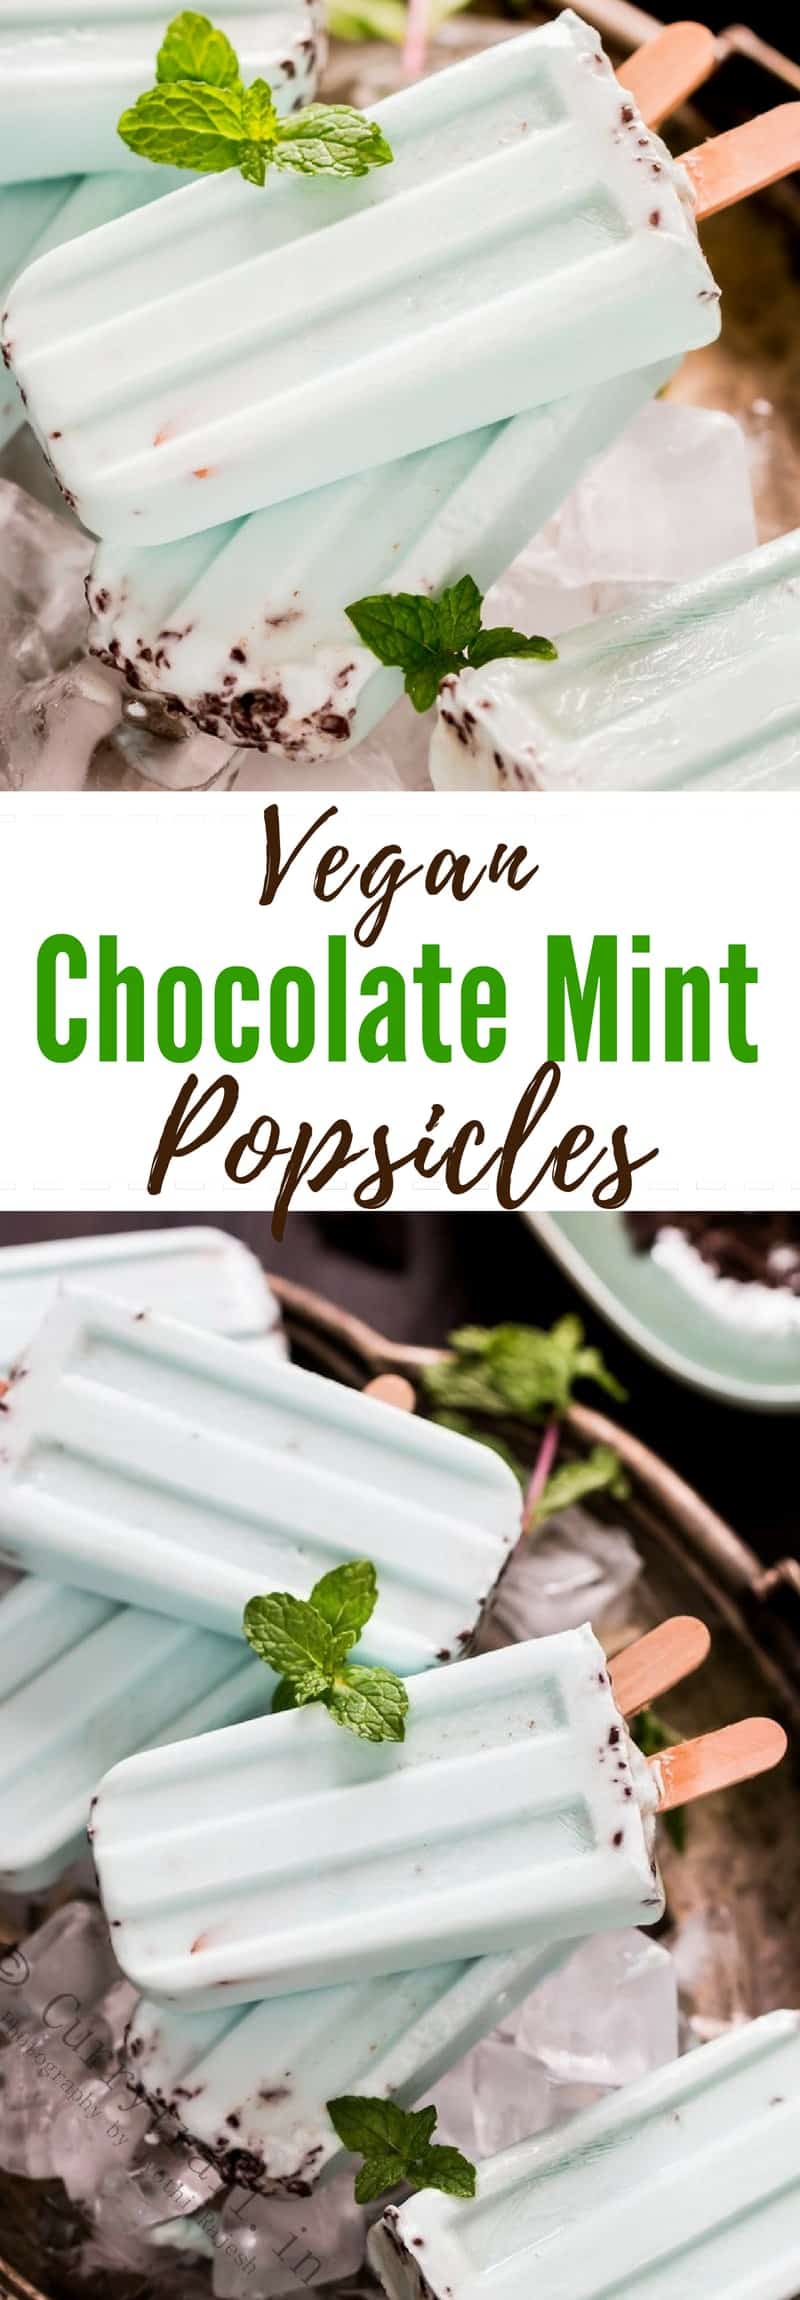 This mint chocolate popsicle is made of coconut cream and fresh mint leaves with peppermint flavor to it. You see mint-chocolate combination never fails. The creaminess from coconut milk and the flavors of fresh mint with addictive glorious chunks of chocolate wins my heart every single time. It's vegan, gluten-free, diary-free